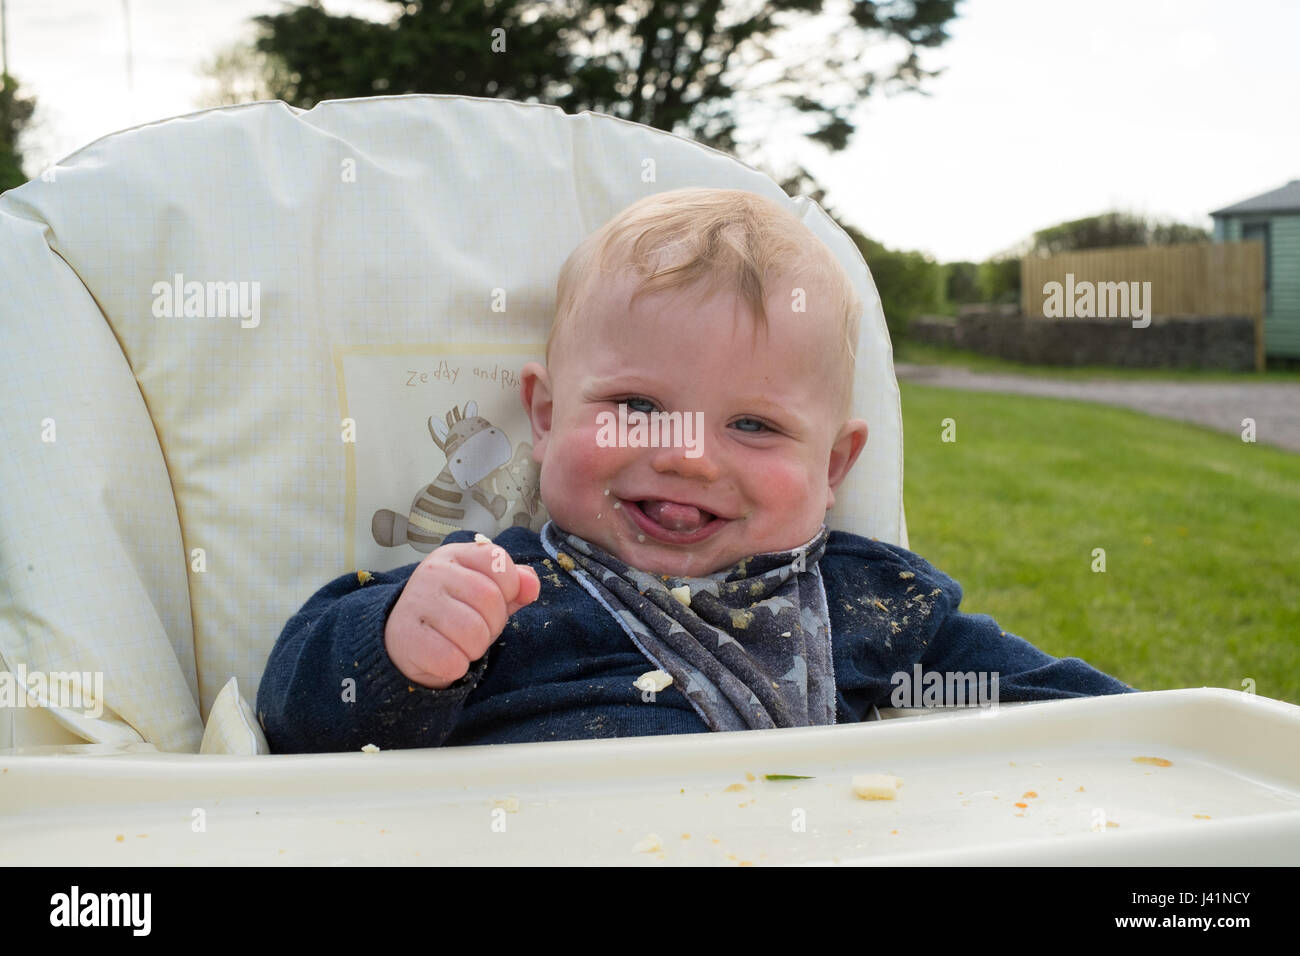 Seven Month old baby boy in a high chair, Hope Cove, Devon, England, United Kingdom. Stock Photo